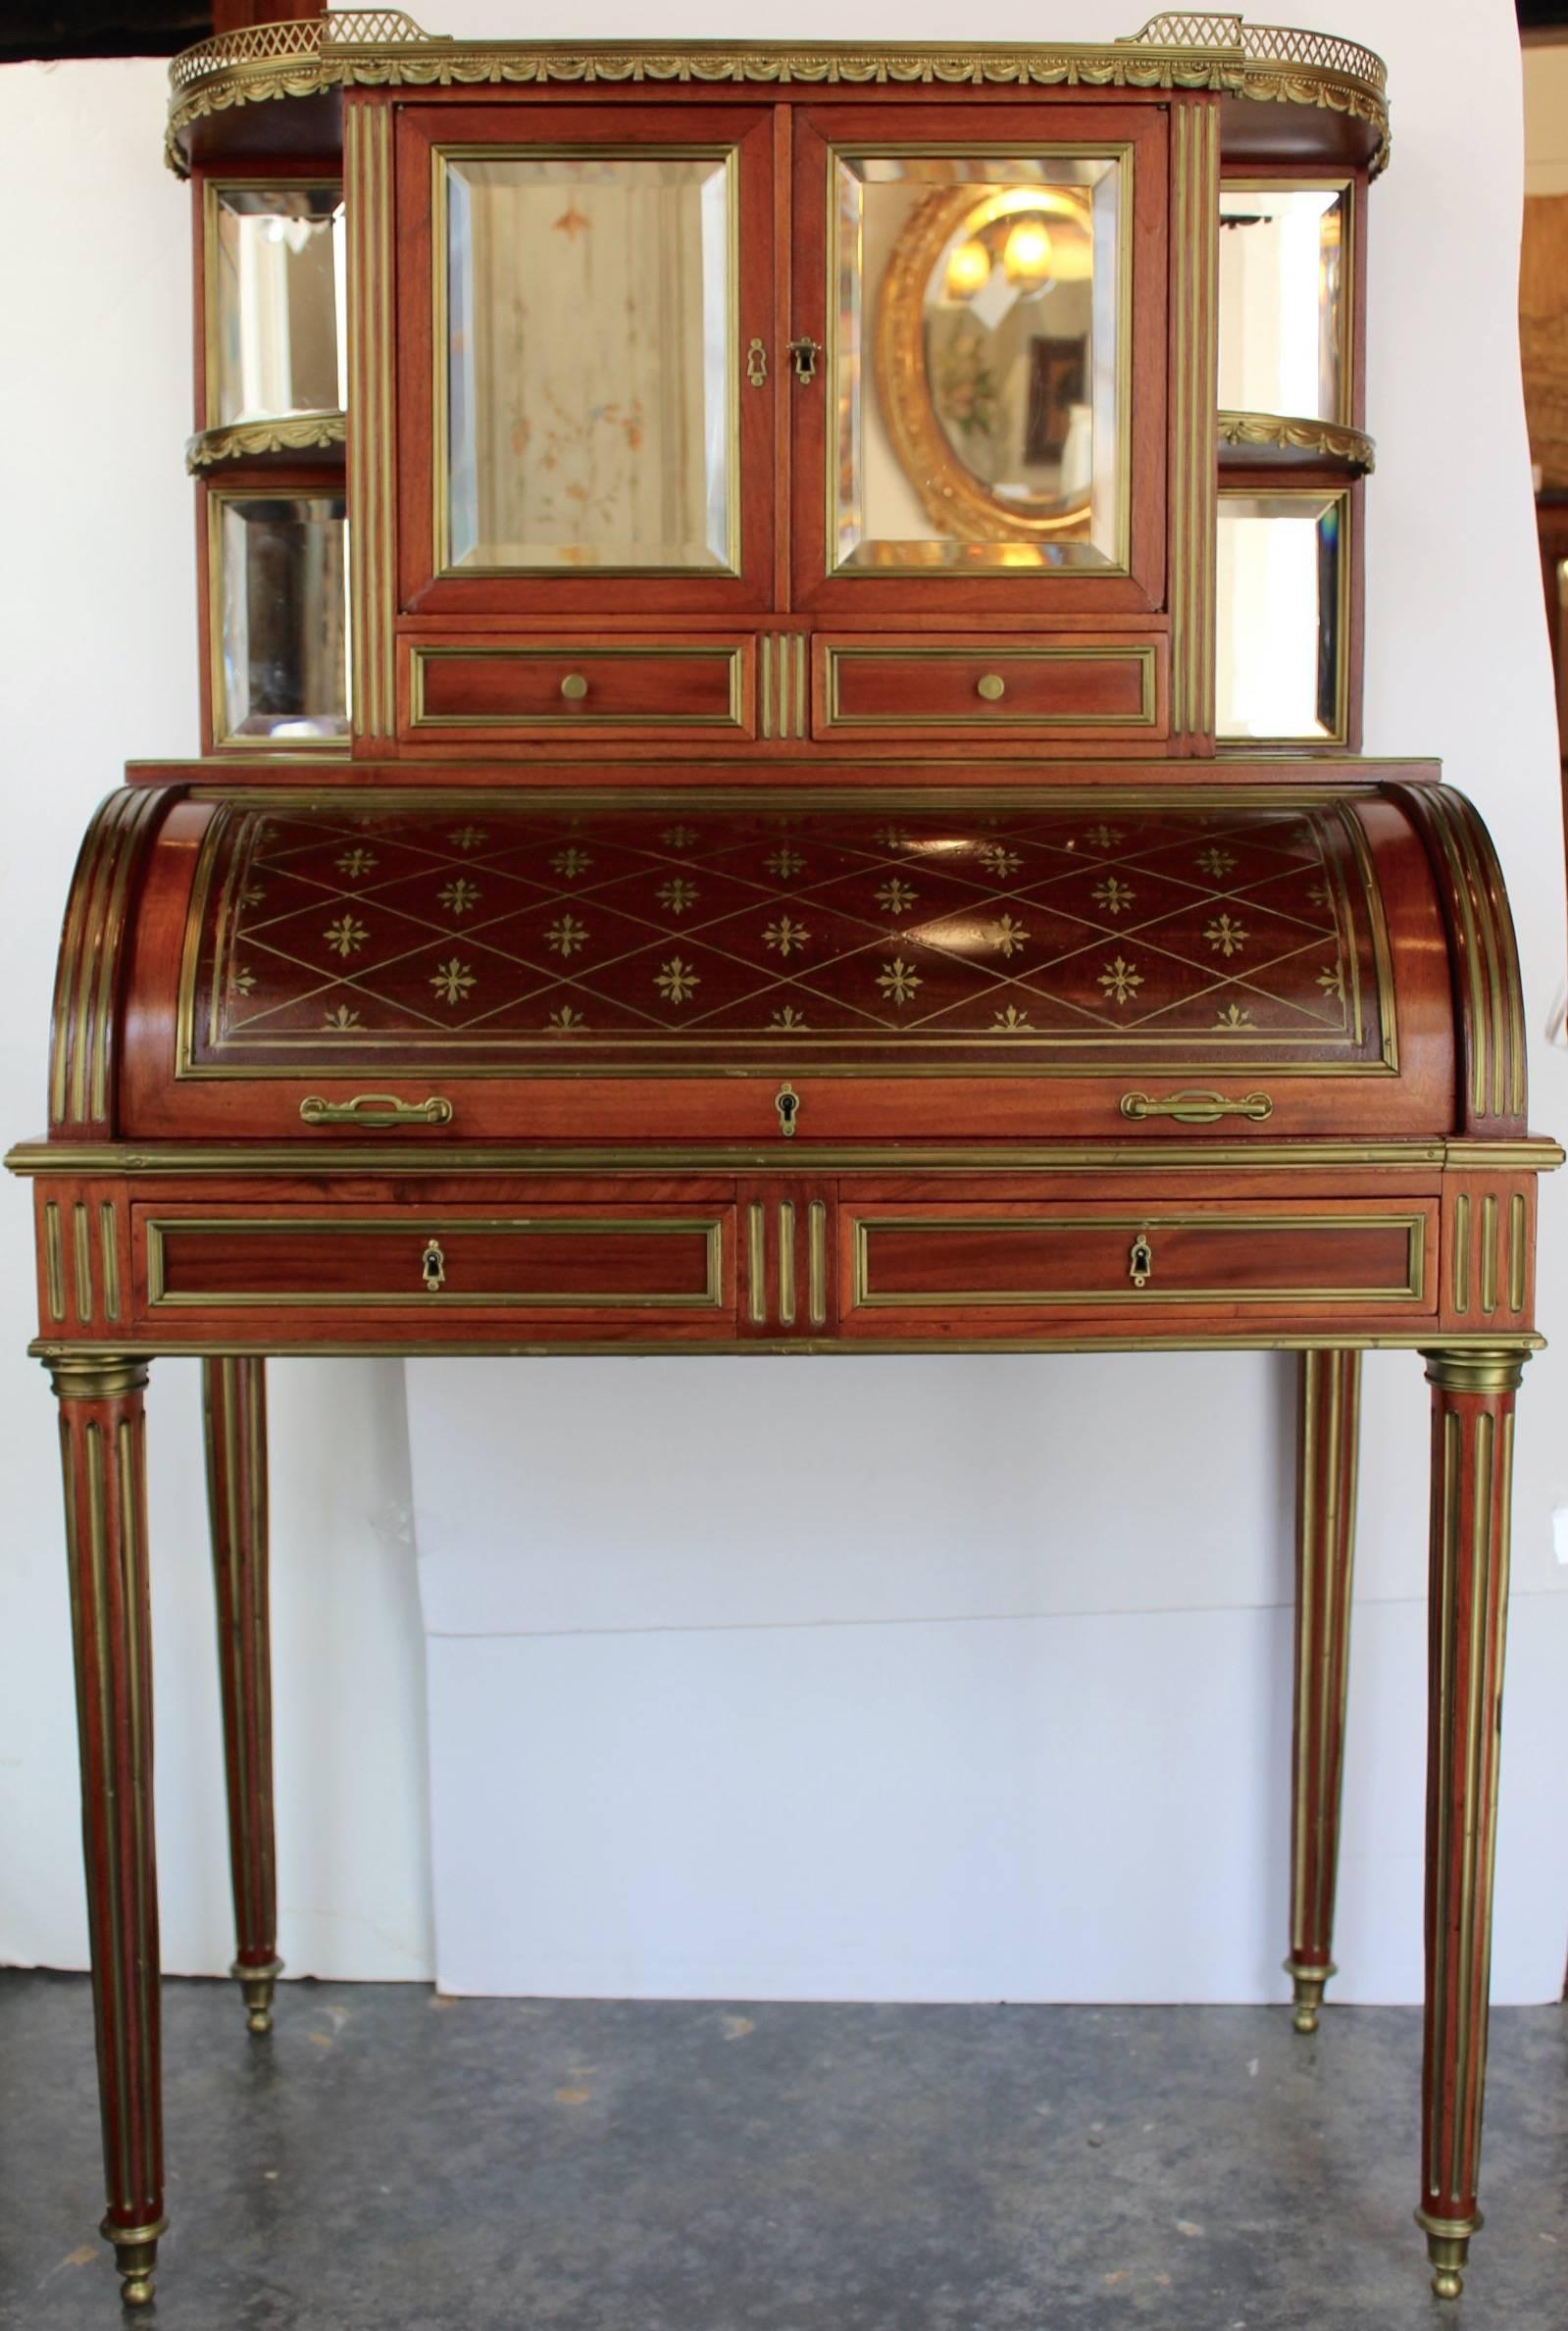 Interesting Louis XVI style mahogany cylinder desk with a white marble top having a brass gallery rail and under which a cabinet with two mirrored glass doors, four quarter round mirrored shelves and two short drawers. All glasses are beveled.
This